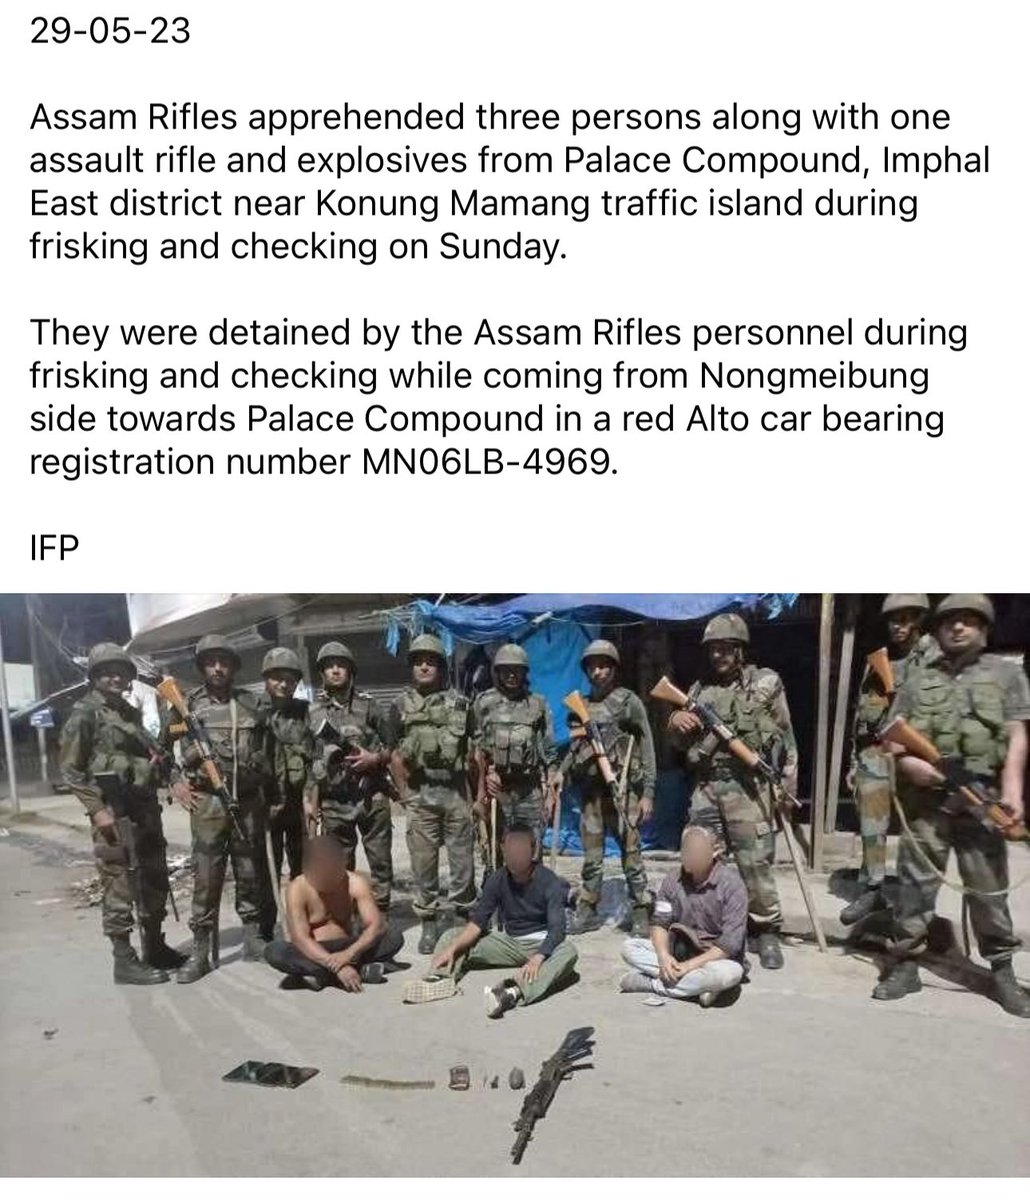 The Assam Rifles apprehended 3 Meitei Terrorists with Assault Rifles and Explosives in today's early morning in the Heart of Imphal, Manipur Capital

@AmitShah @ANI @ndtv @easterncomd @EastMojo @IndianExpress @makesyoucakes @the_hindu @Spearcorps @adgpi @official_dgar @NELiveTV